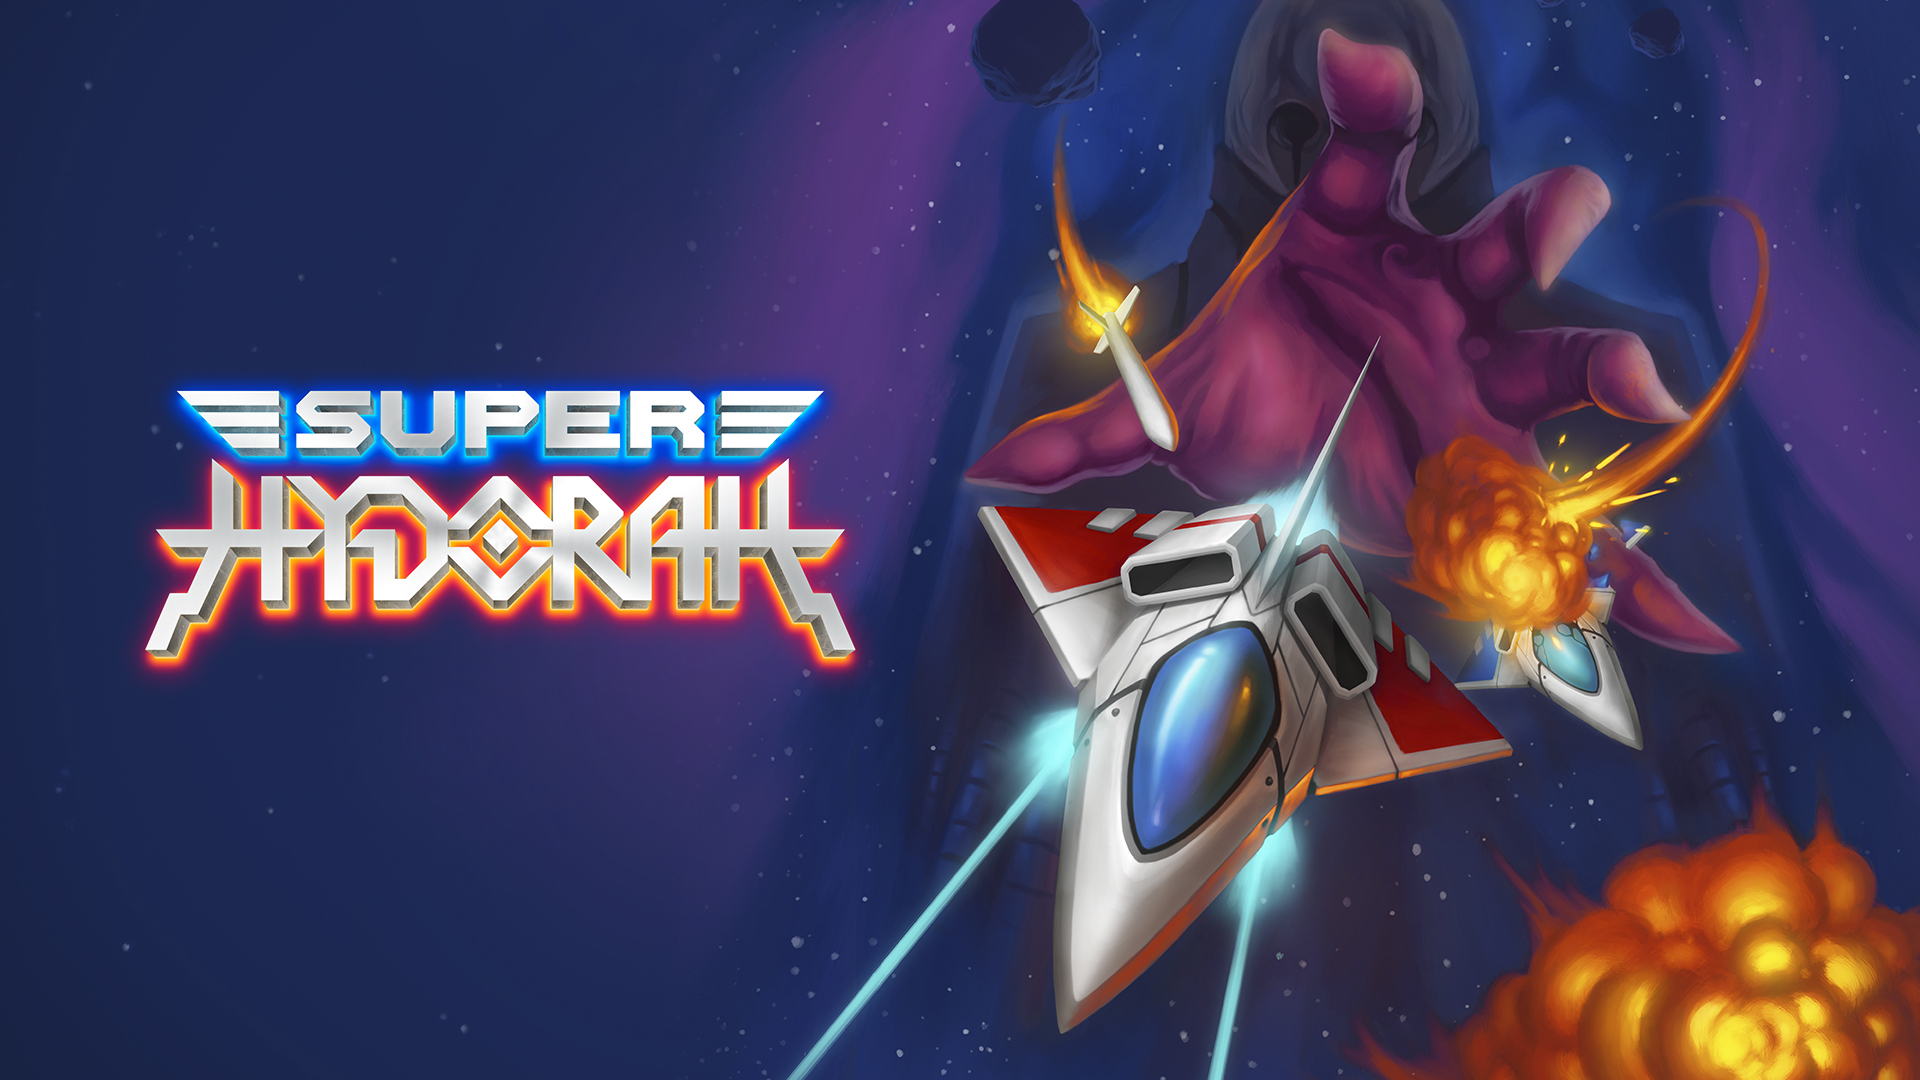 Super hydorah, the horizontal non linear shmup is being released on xbox one and steam